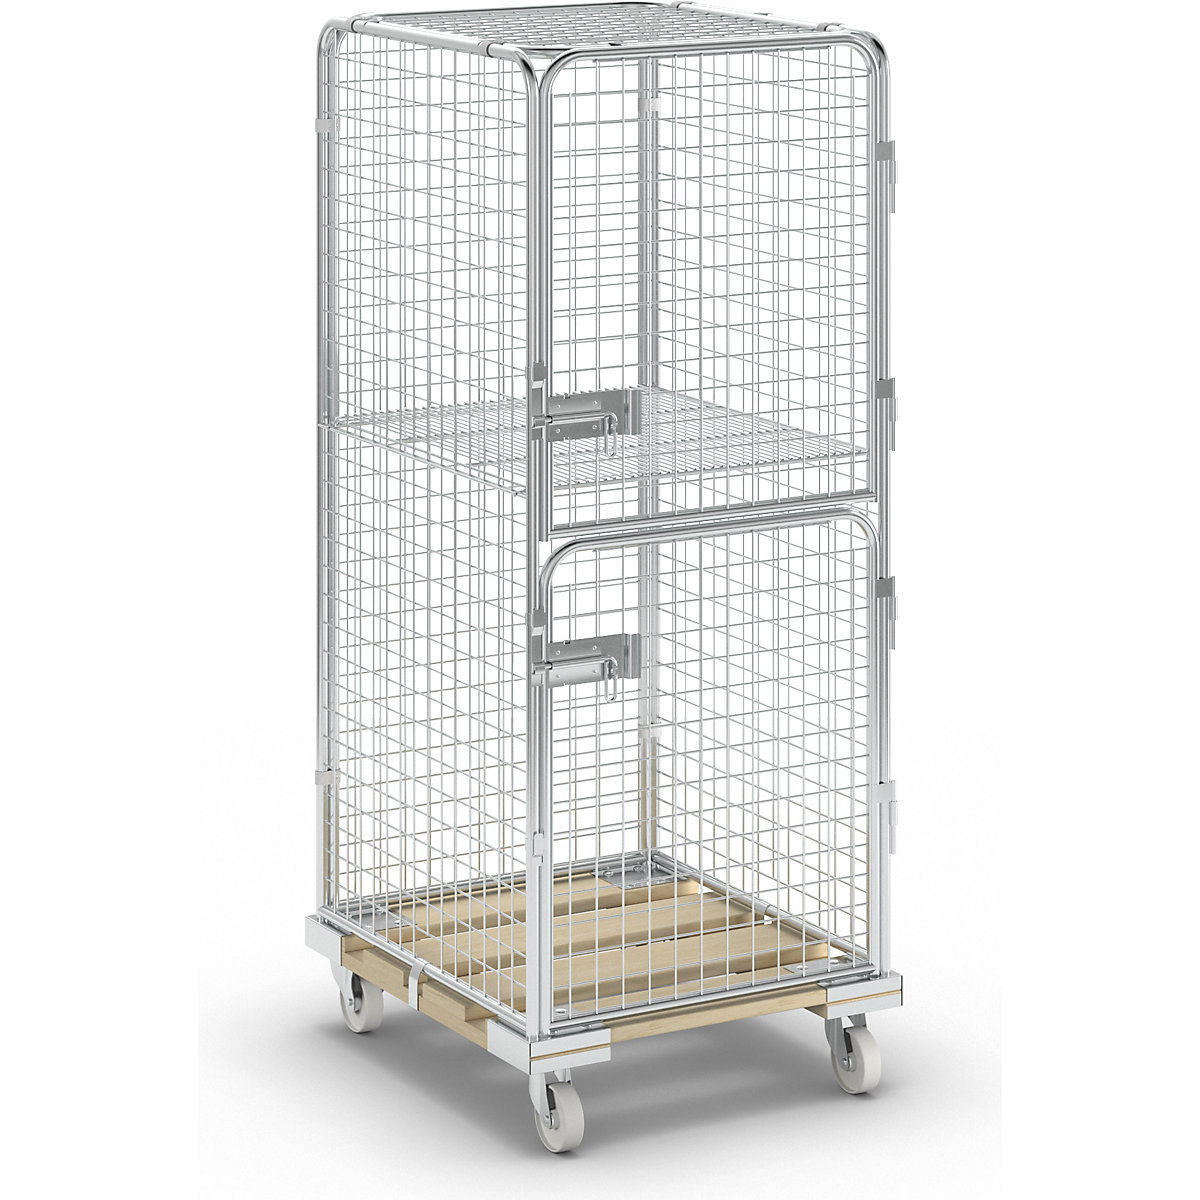 Security roll container with wooden dolly, effective height 1585 mm, with 2 doors, 1 wire mesh intermediate shelf-12